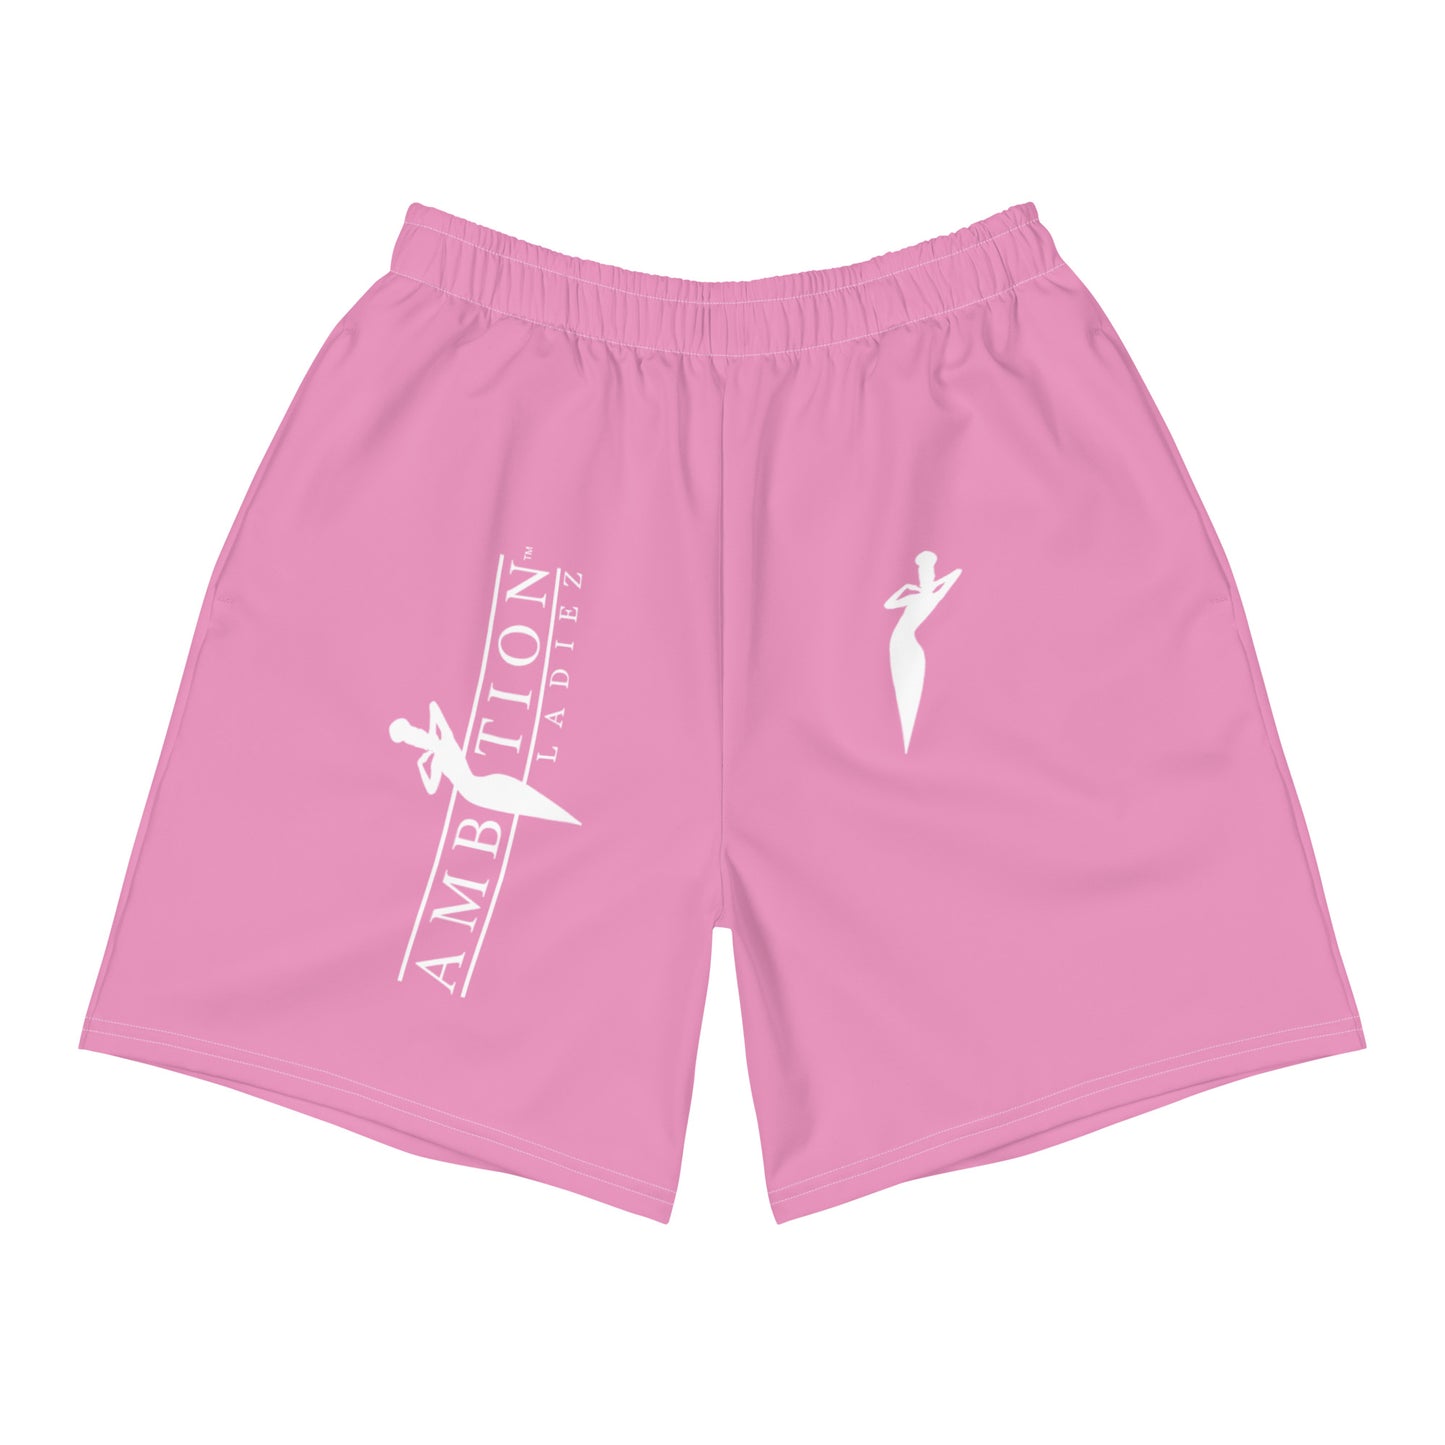 Pink Sports Shorts for Men